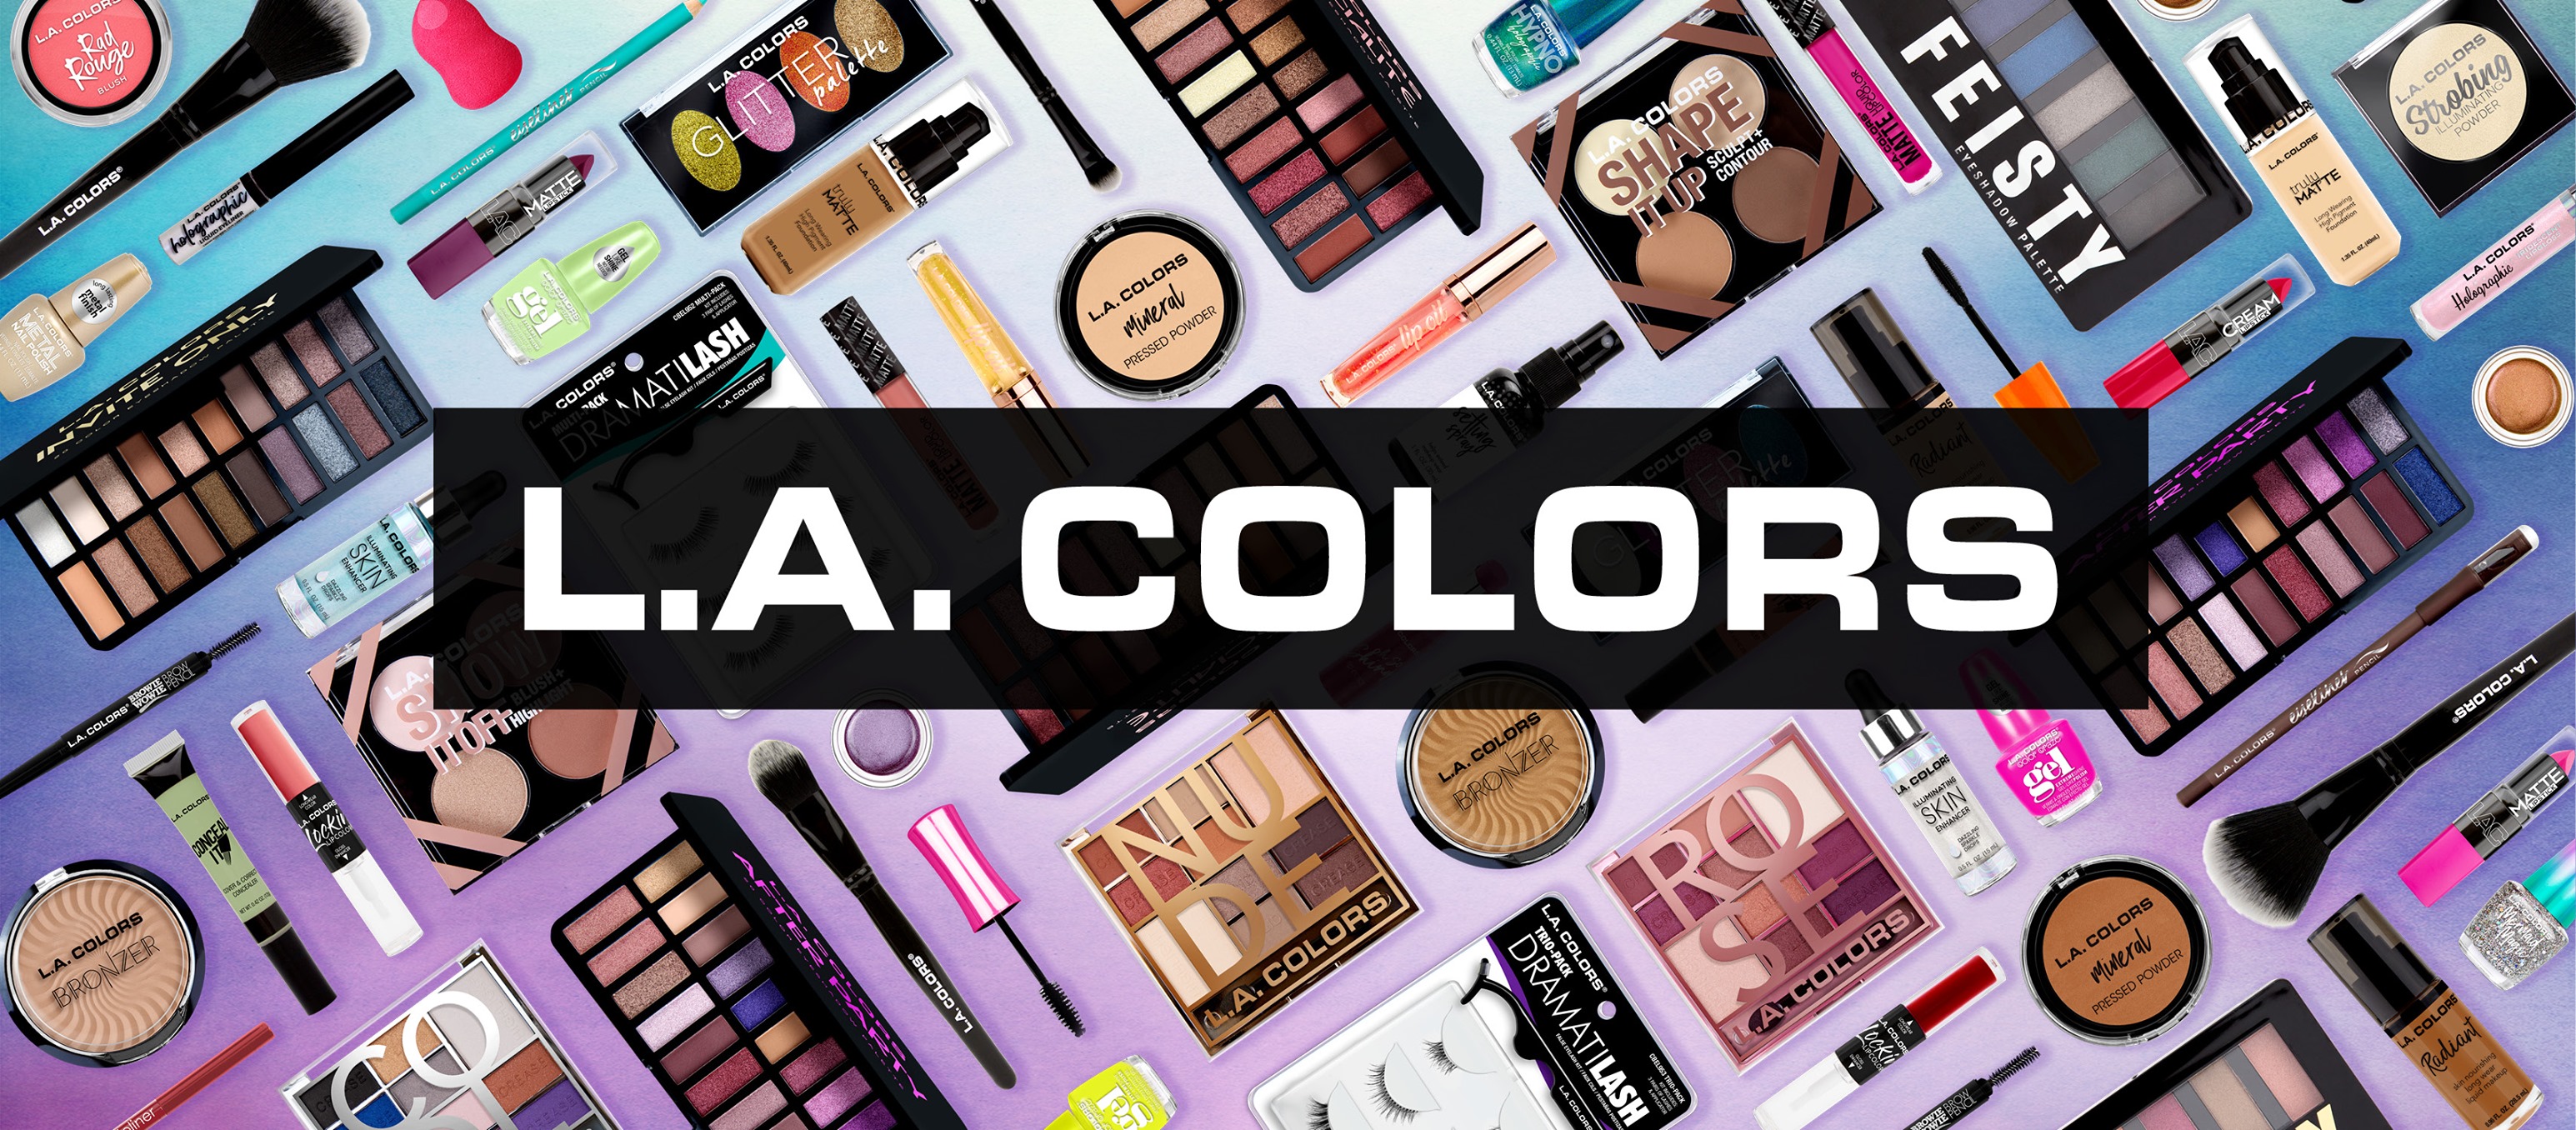 Image of L.A. Colors Brand products